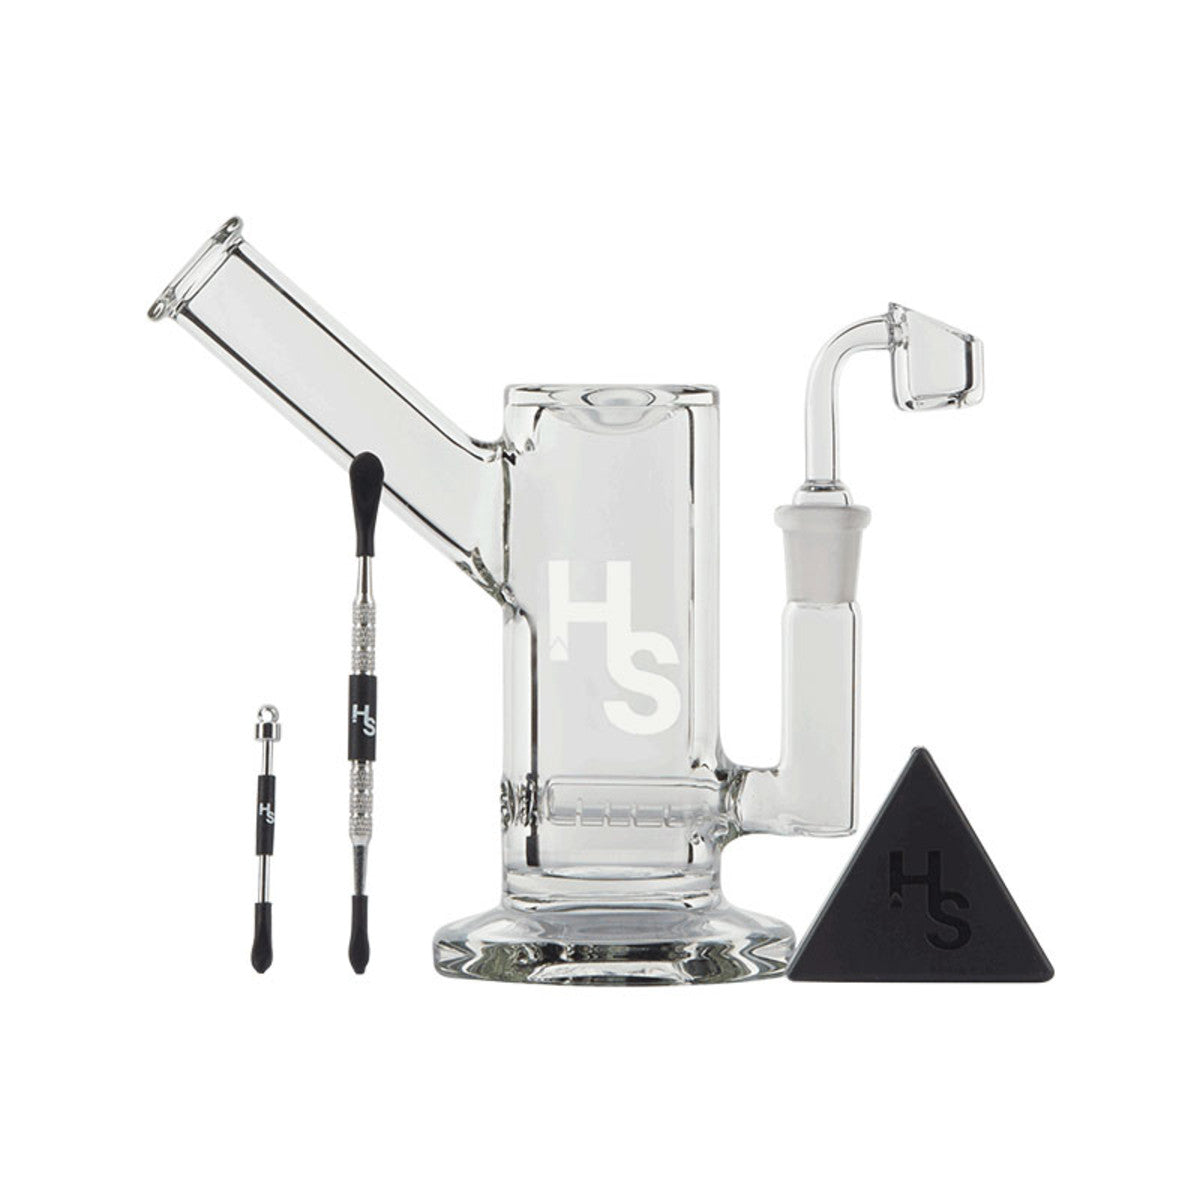 Higher Standards Heavy Duty Rig. Medical-Grade Borosilicate Glass Rig that has been Handcrafted for Powerful, Reliable Performance. Features a Quartz Banger for Optimal Flavor Transfer. MOST DIVERSE CBD CONCENTRATE COLLECTION ON THE WEB. Live Resin, Wax, Shatter &MORE! Glass Rigs, Pipes. Dab, Vape, Smoke Accessories. Top Shelf CBD Hemp Flower. - Sauce Warehouse